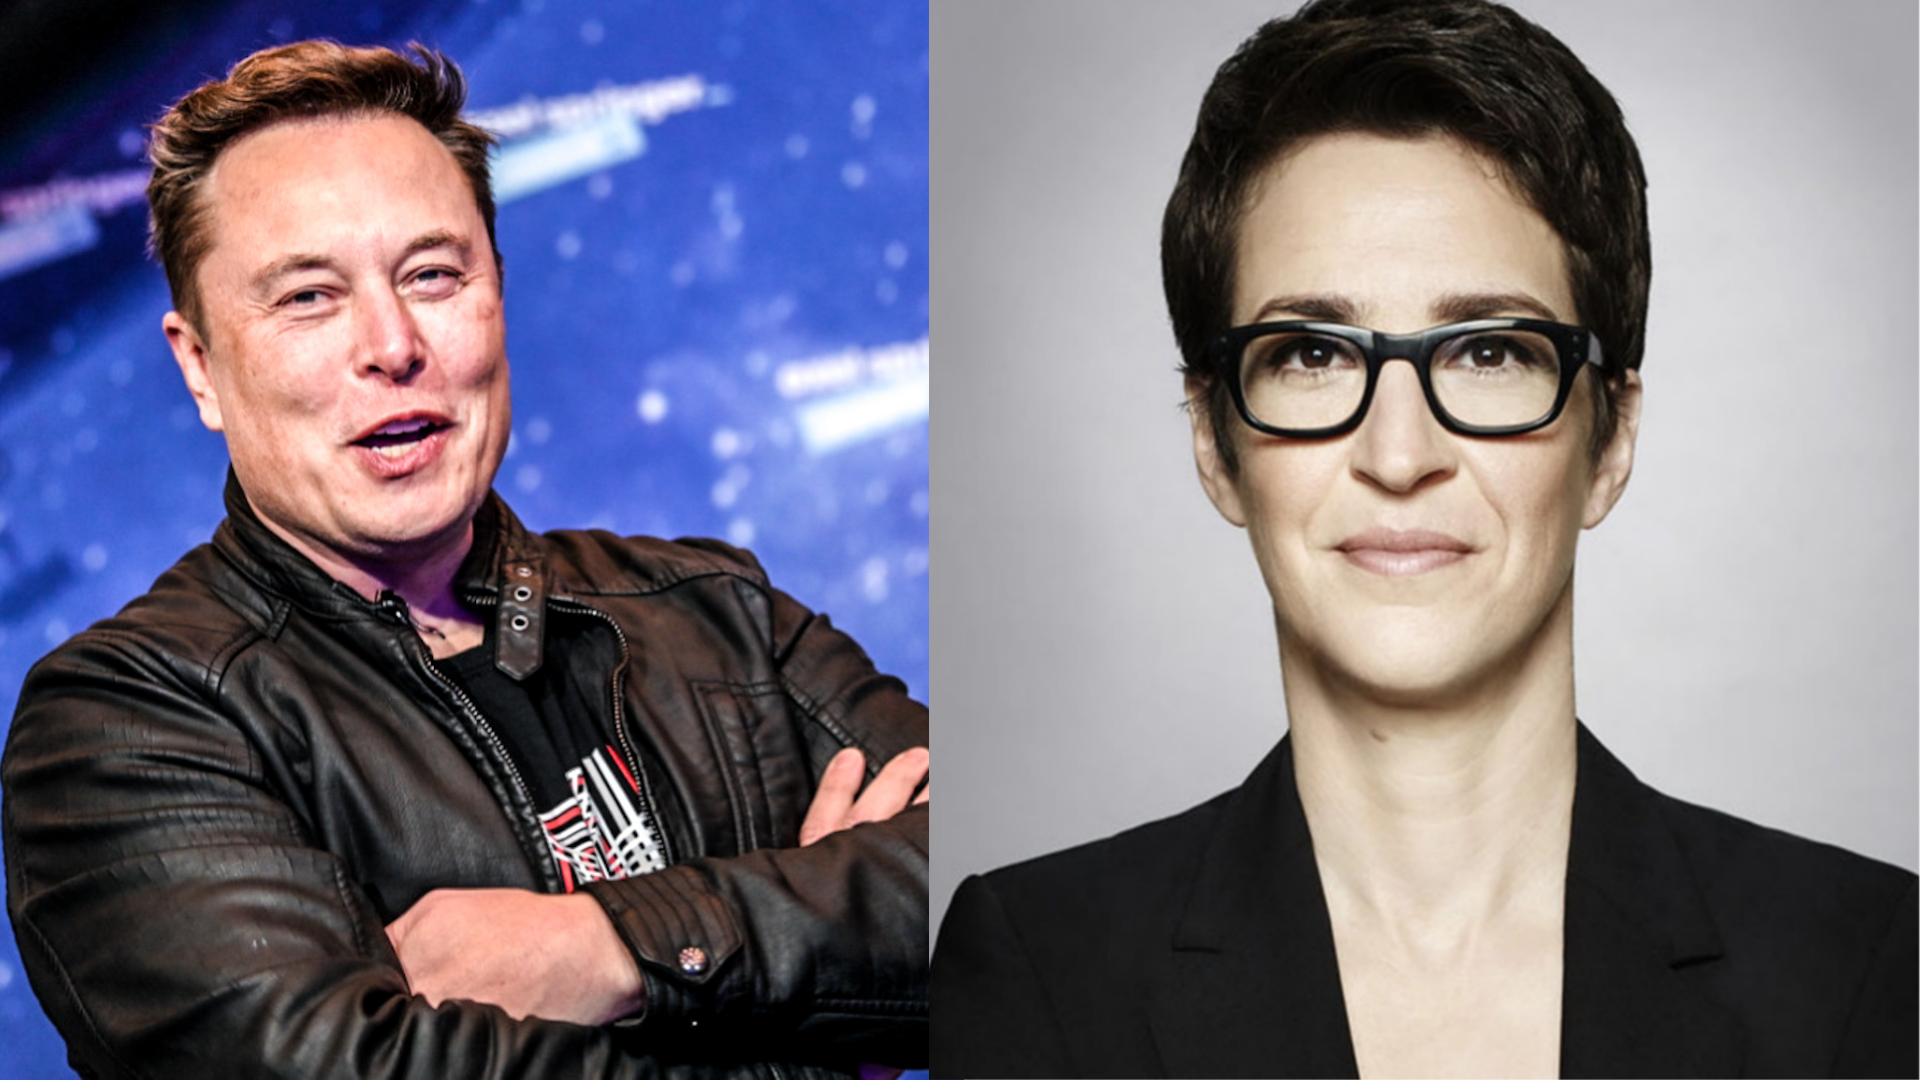 ABC’s New Owner Elon Musk Hires Rachel Maddow To Join ‘The View’